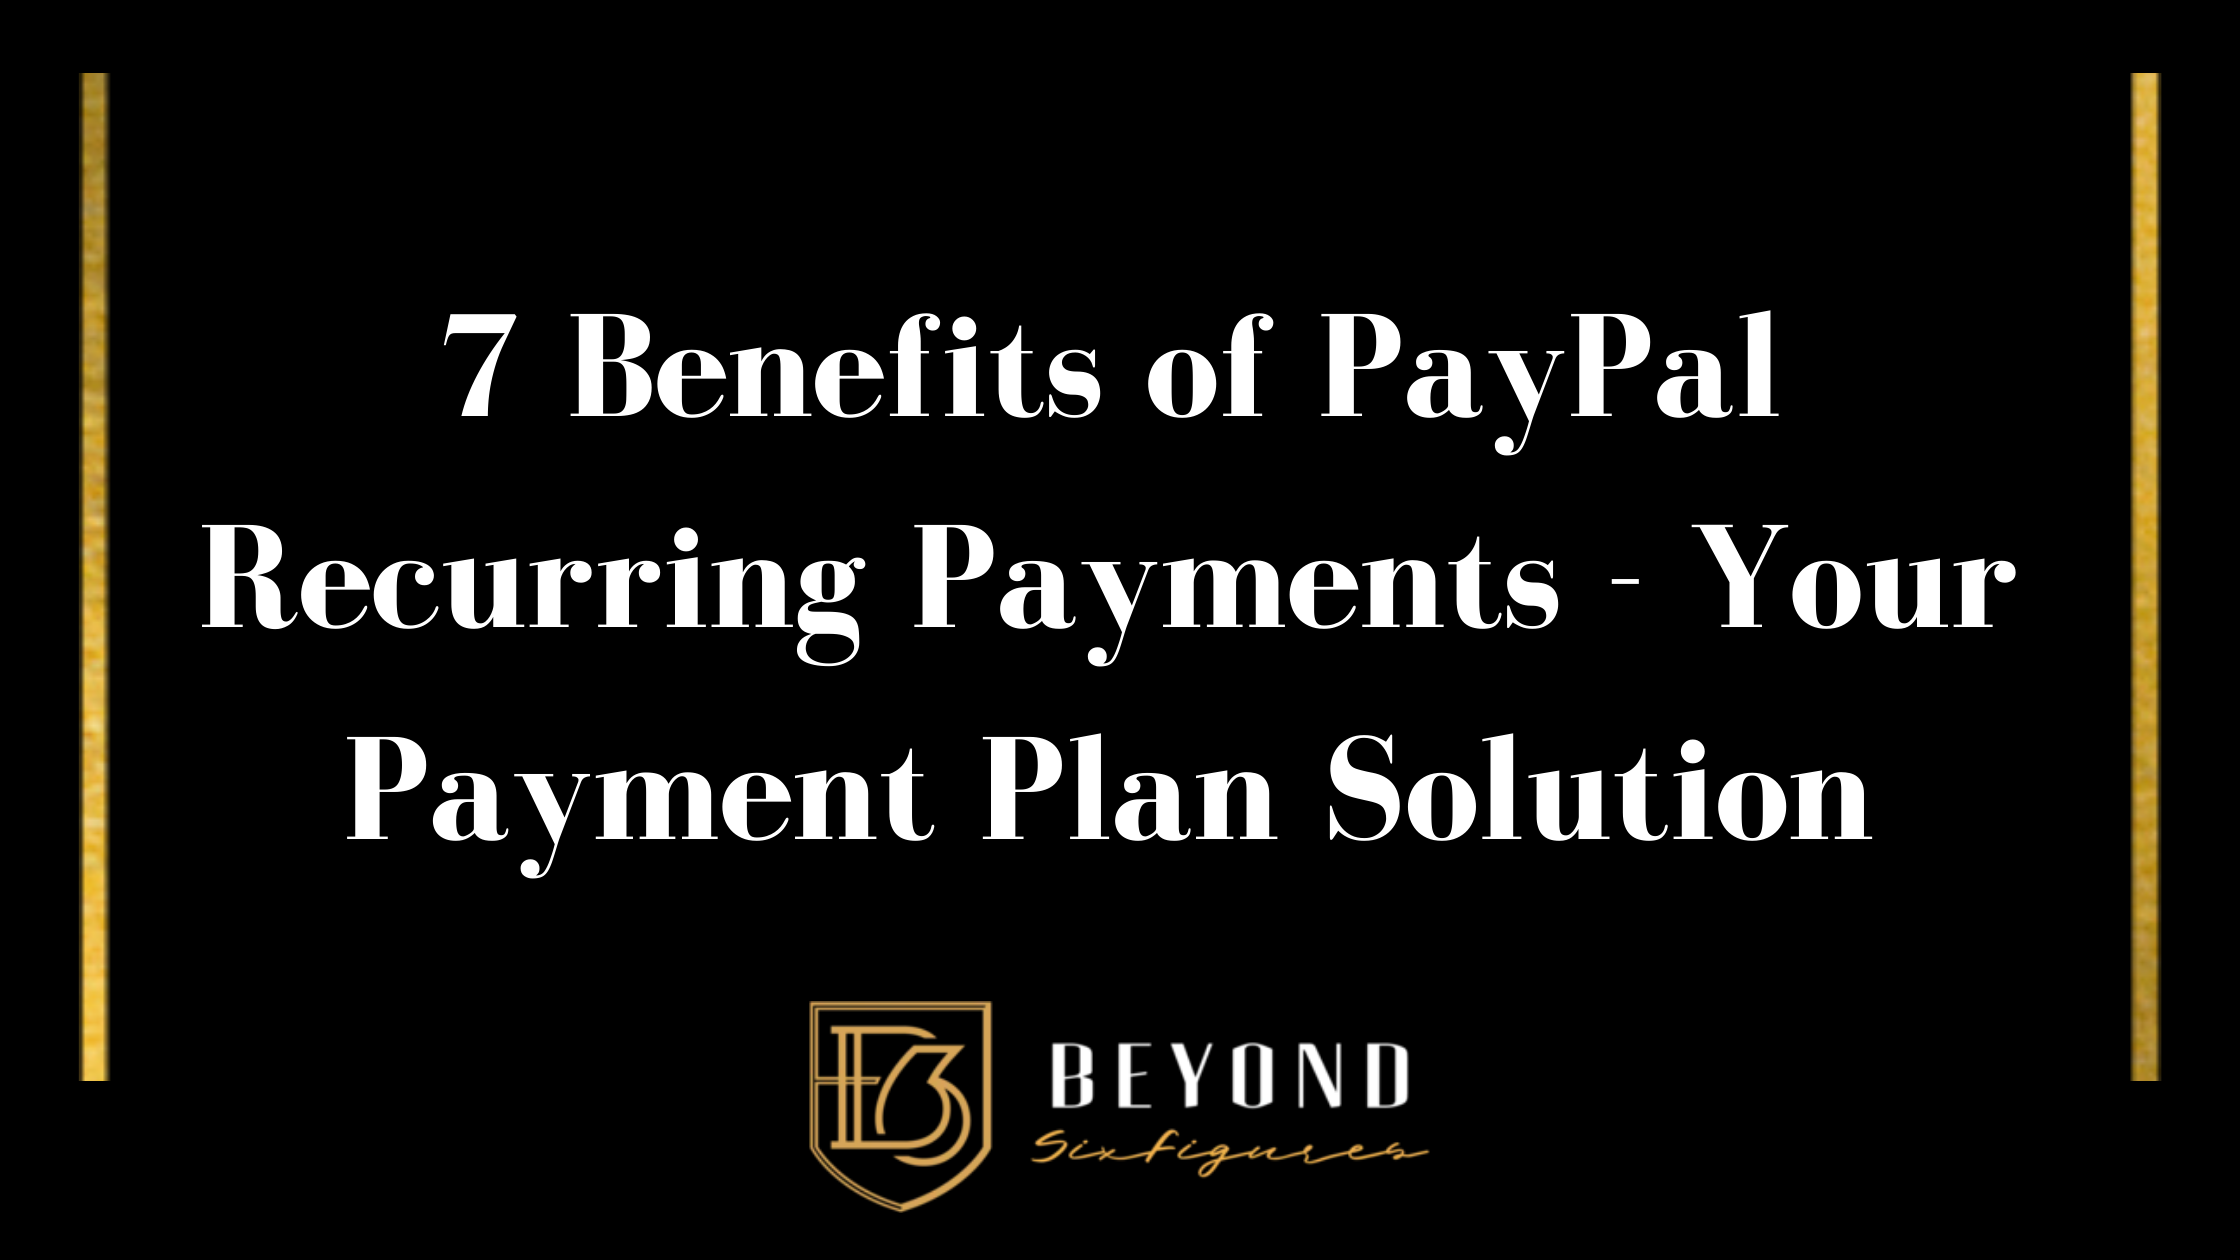 Blog Banner of 7 Benefits of PayPal Recurring Payments - Your Payment Plan Solution